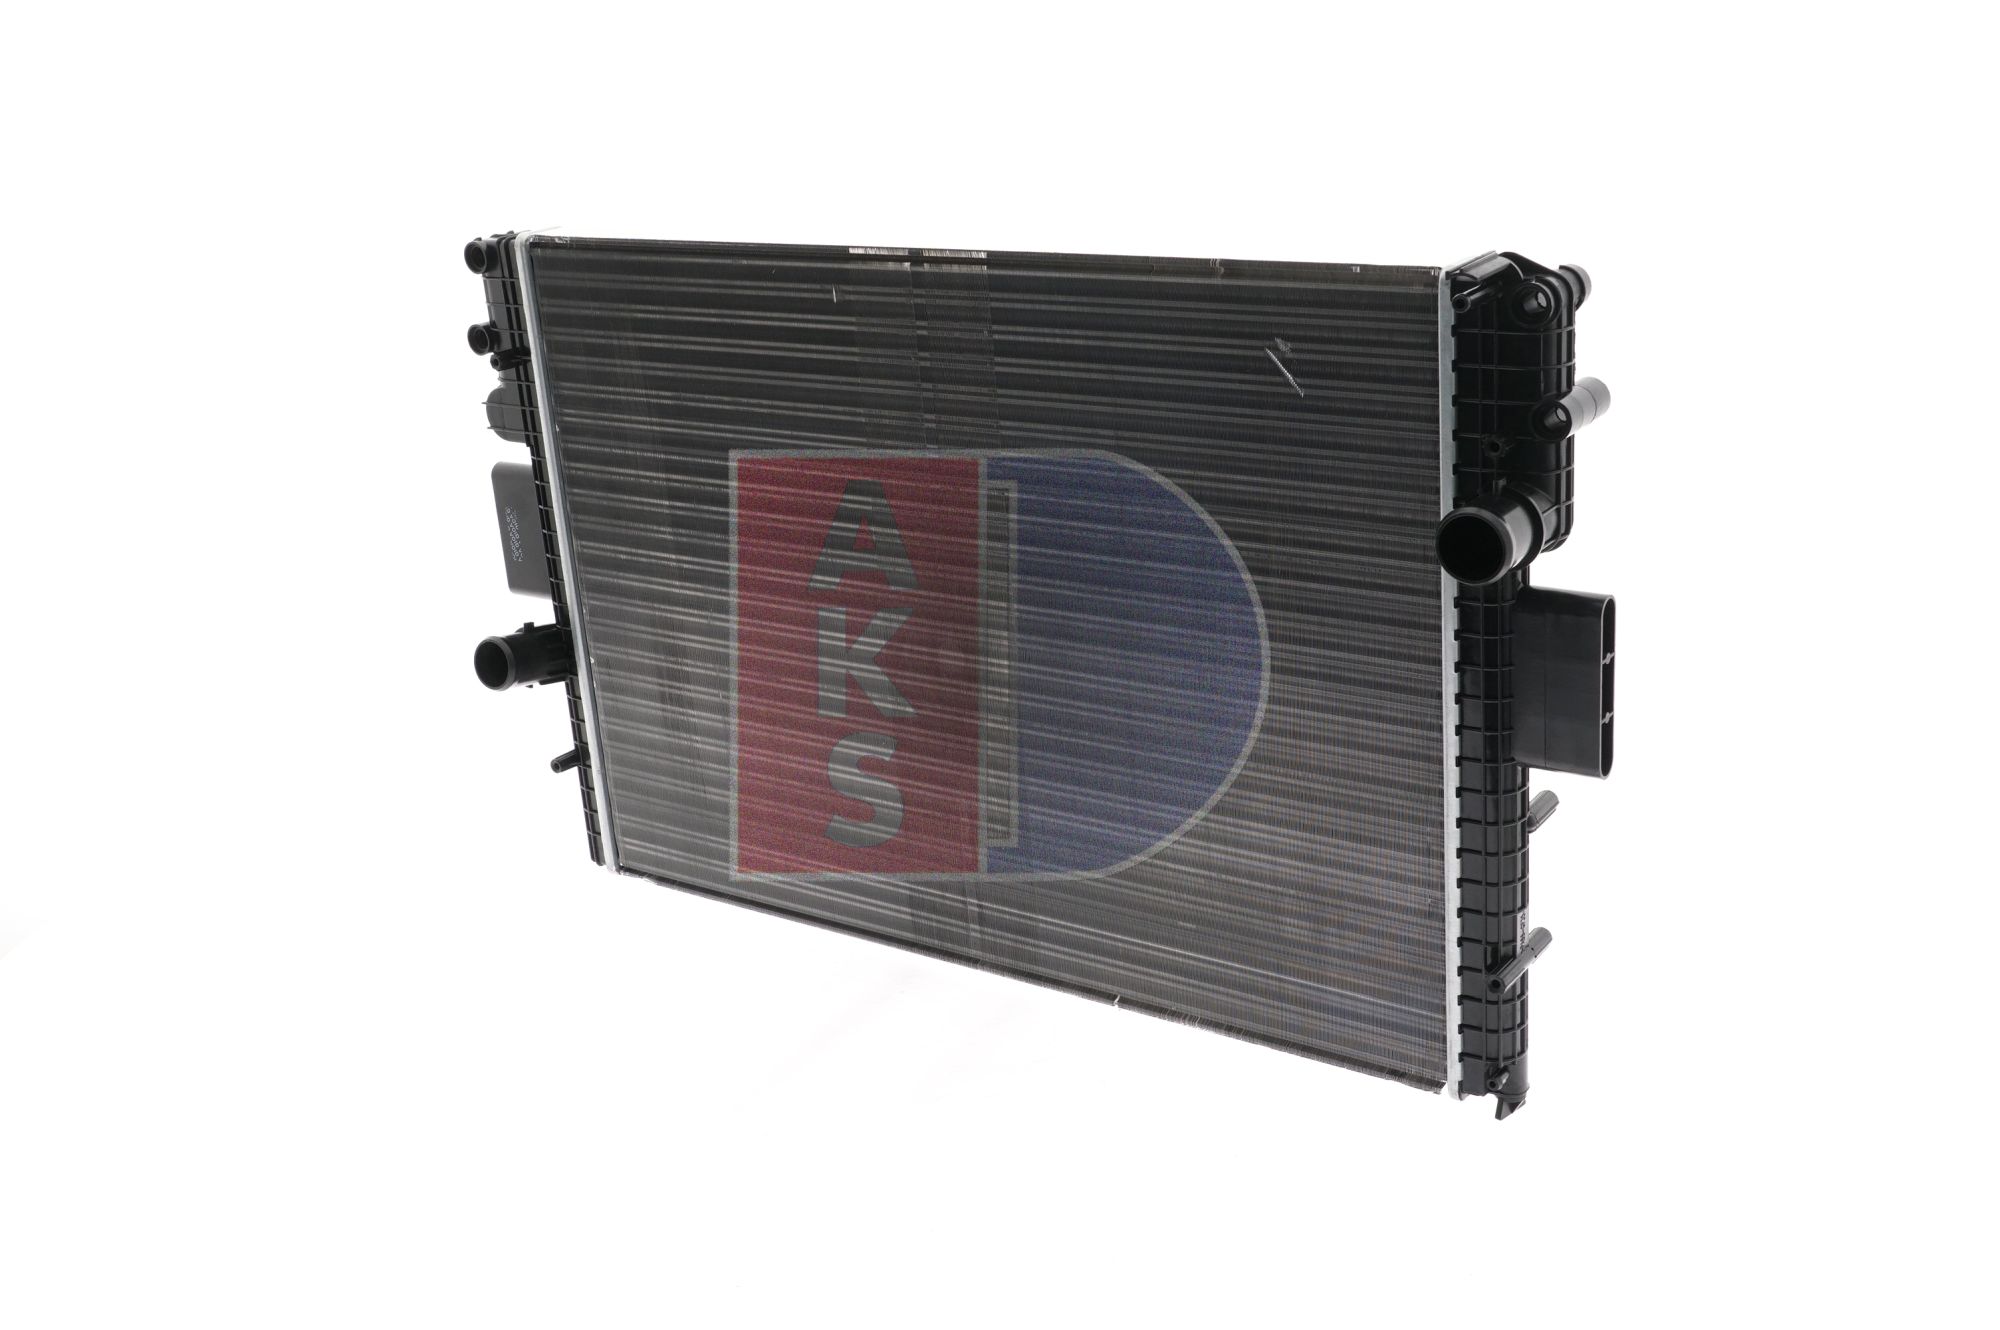 AKS DASIS 400028N Engine radiator 650 x 456 x 32 mm, Mechanically jointed cooling fins